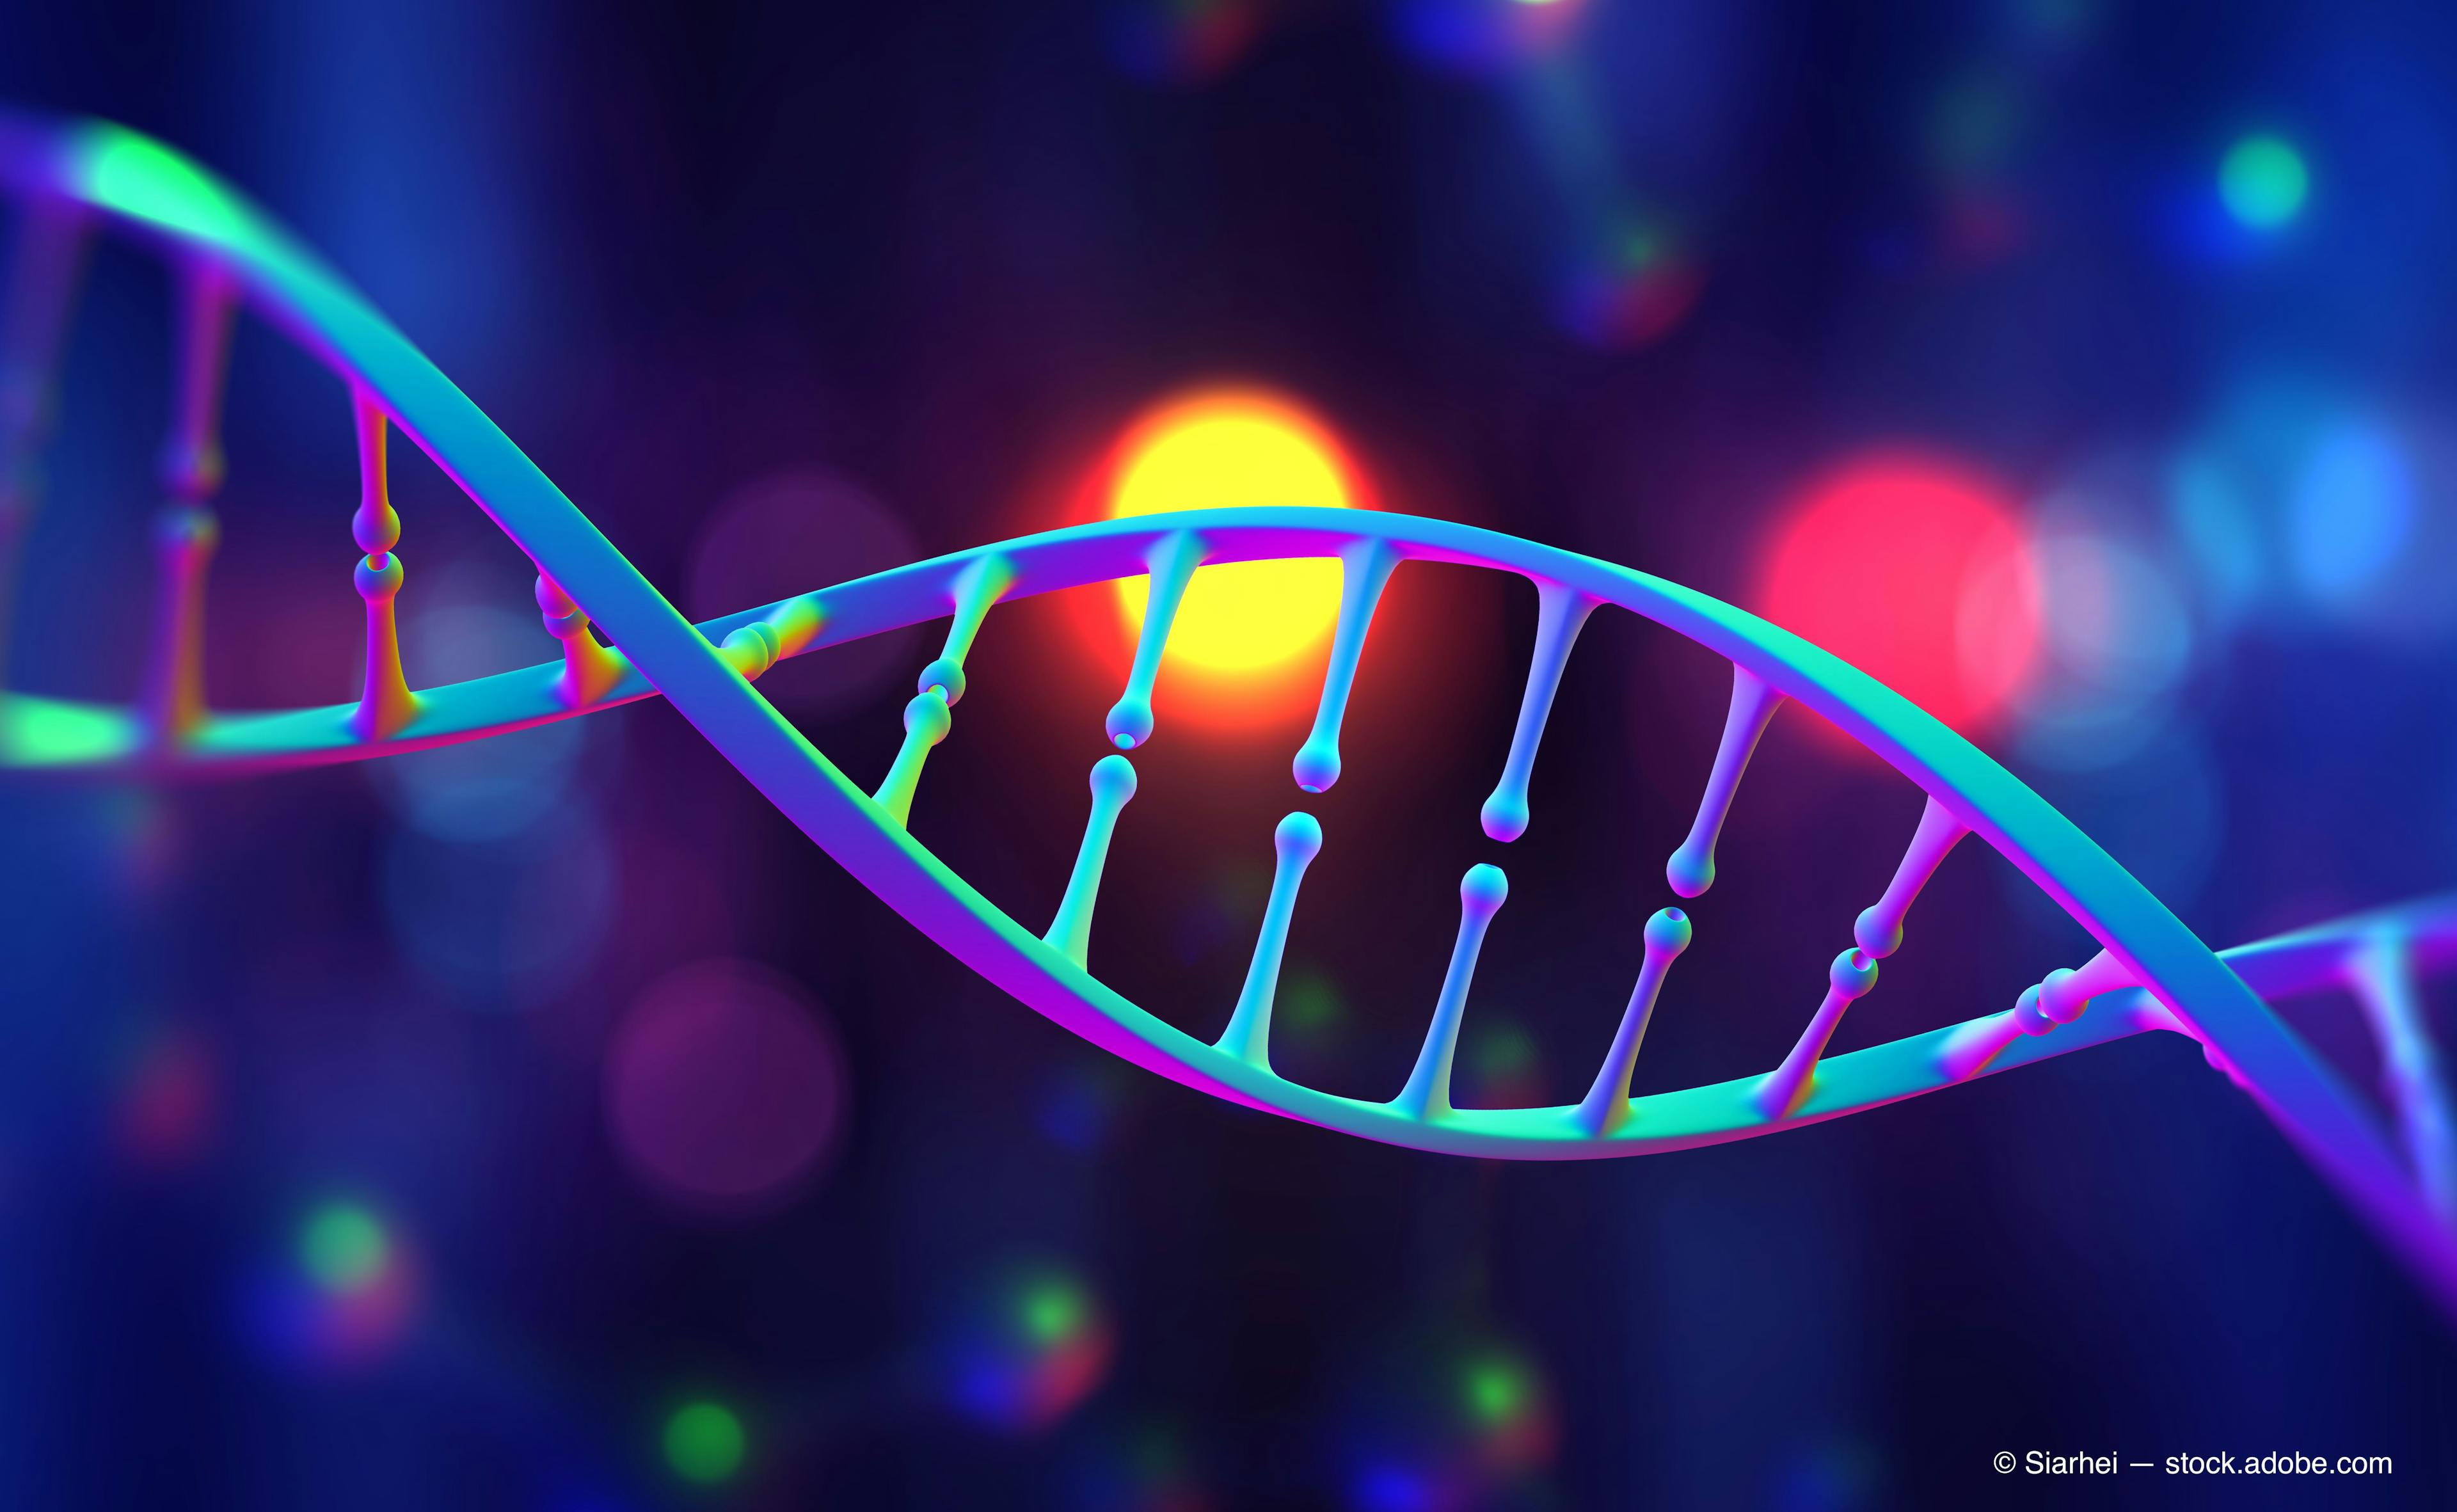 Investigators conducted a dose-escalation trial of AAV5-RPGR that included low, intermediate, and high doses of the gene therapy administered to 3, 4, and 3 adults, respectively.